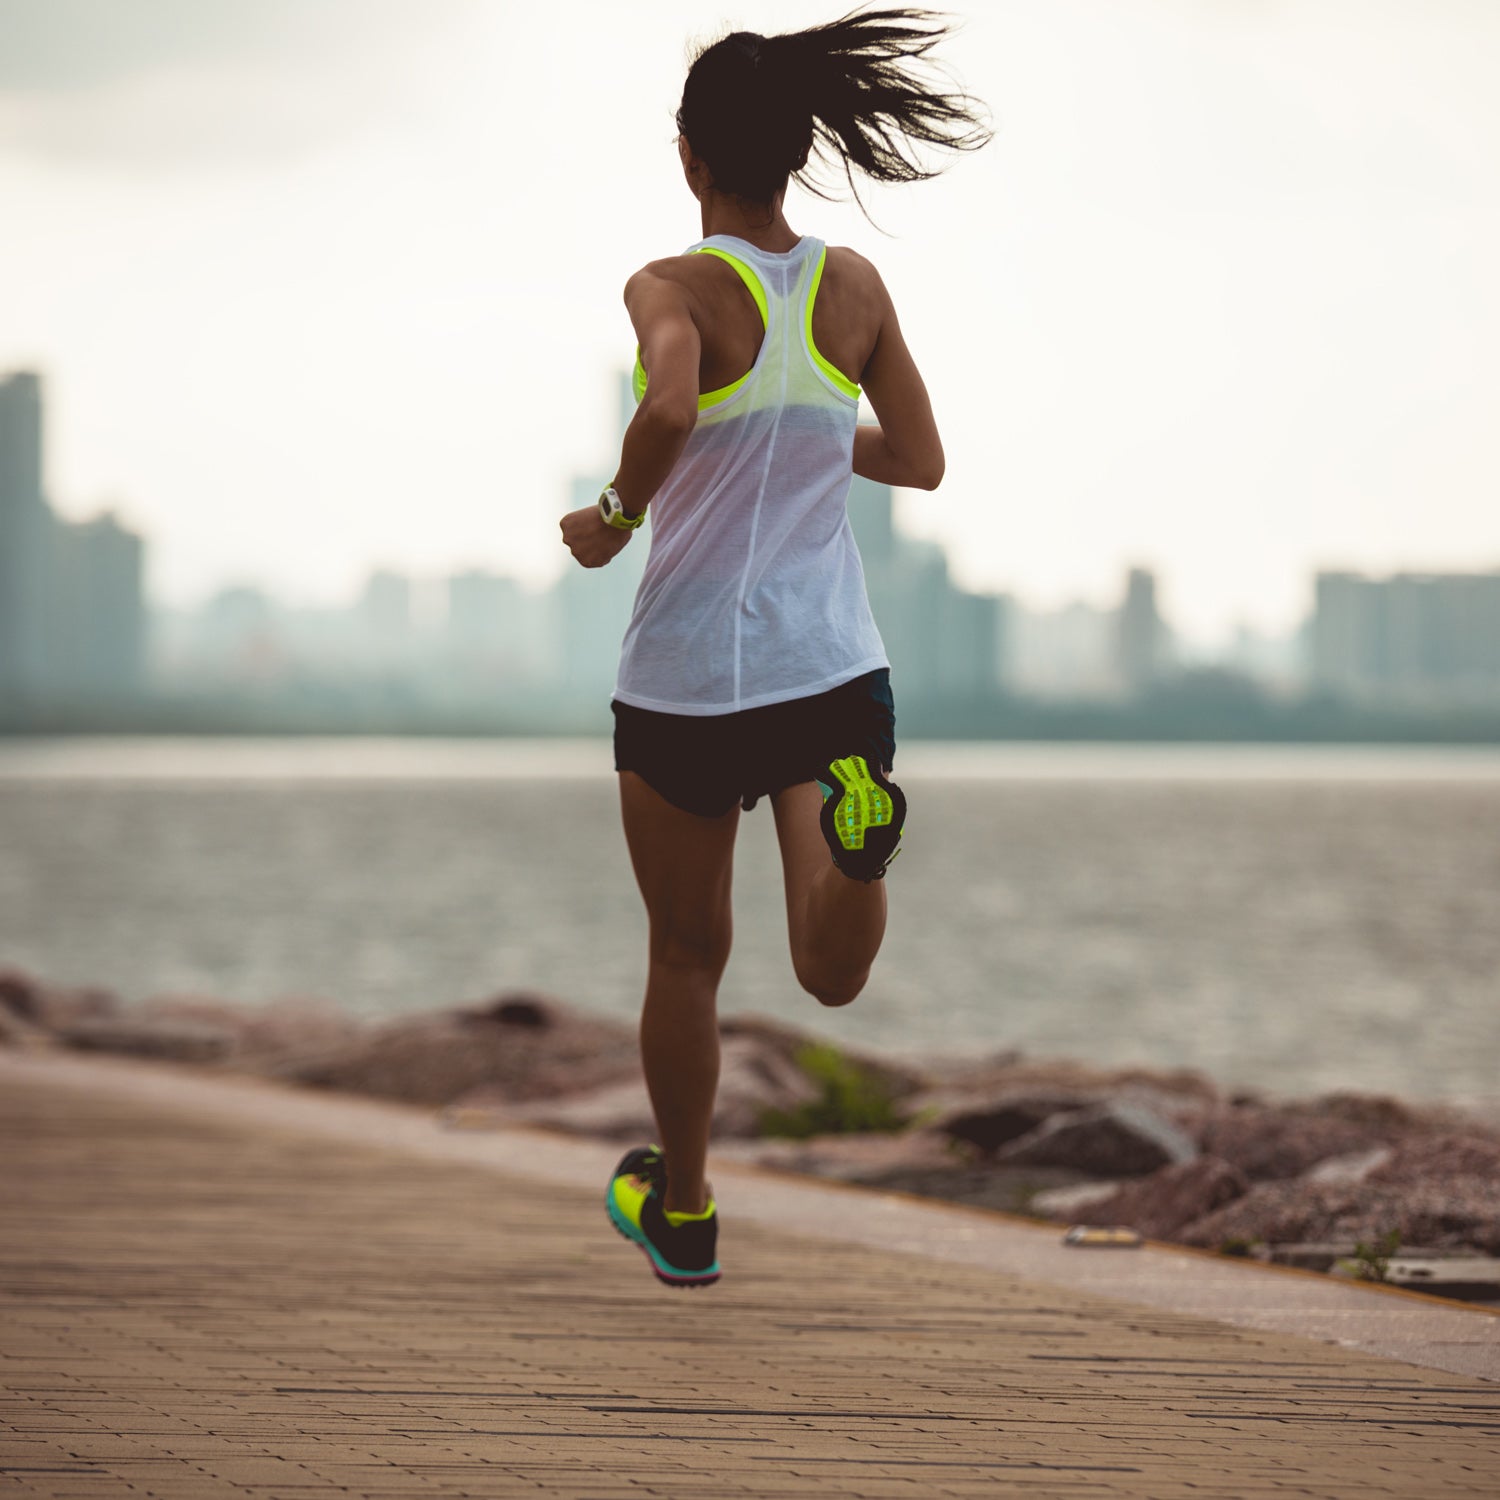 4 Tips For Improving Your 5k PB